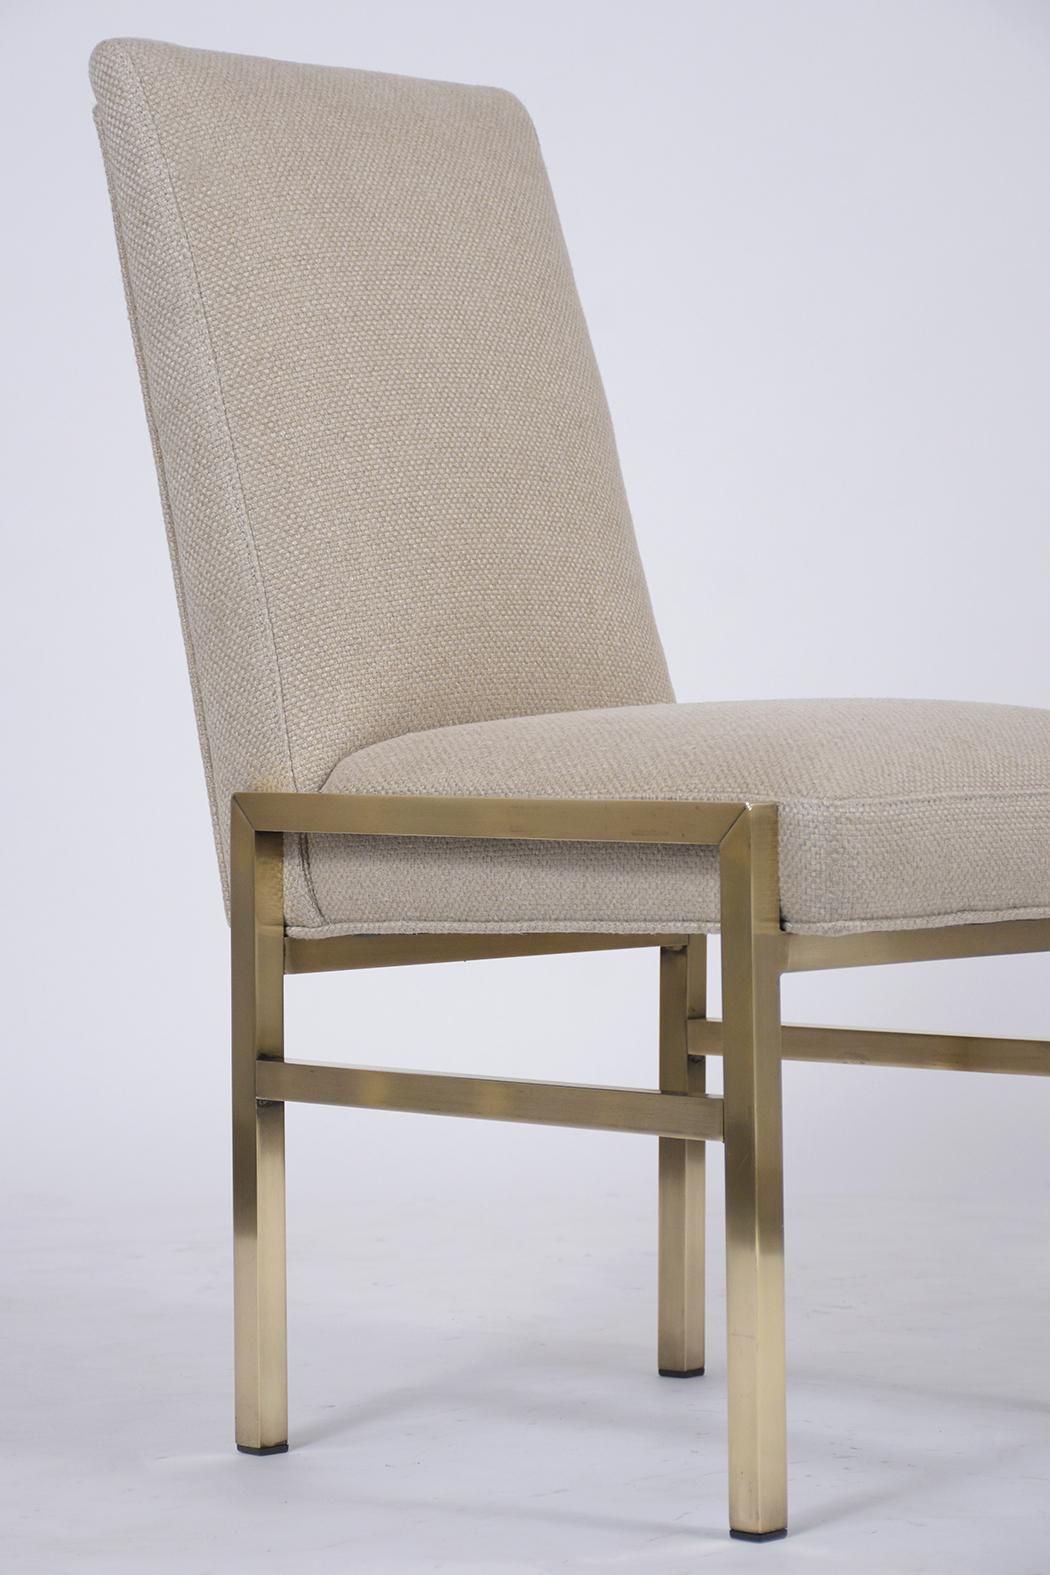 Lacquered Restored Mastercraft Mid-Century Brass Side Chairs with Beige Wool Upholstery For Sale